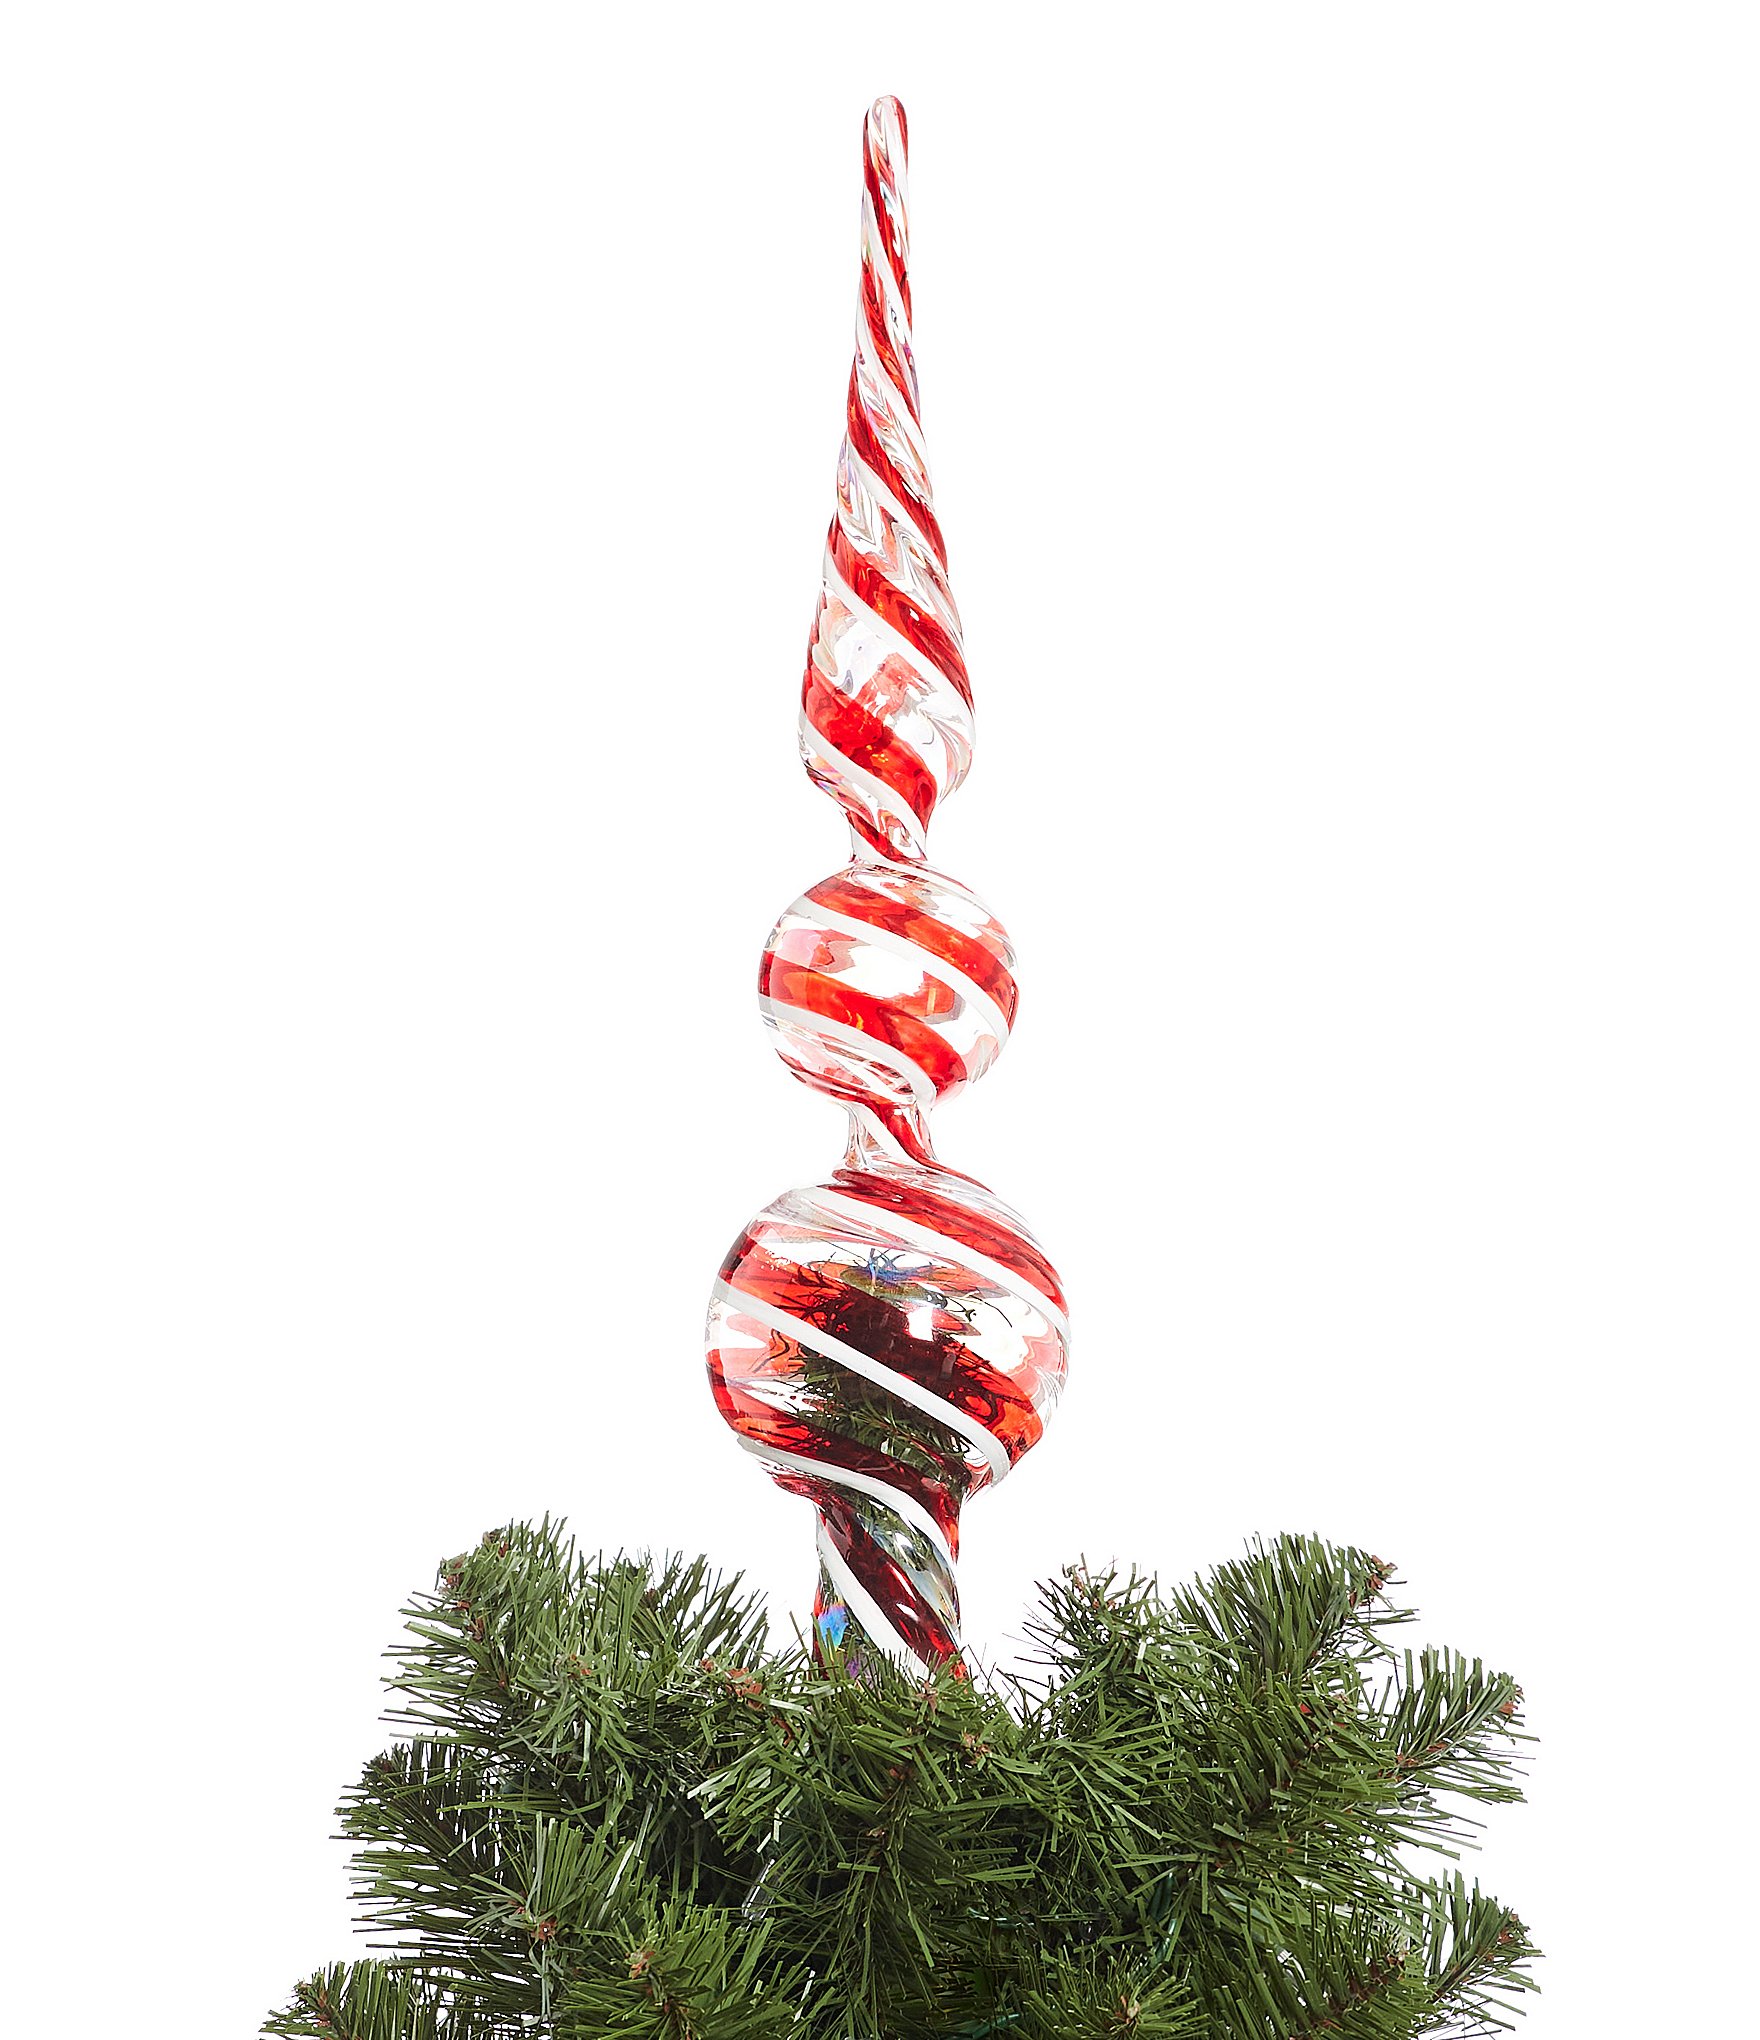 https://dimg.dillards.com/is/image/DillardsZoom/zoom/southern-living-holly-jolly-collection-candy-cane-spiral-finial-tree-topper/00000000_zi_20390008.jpg